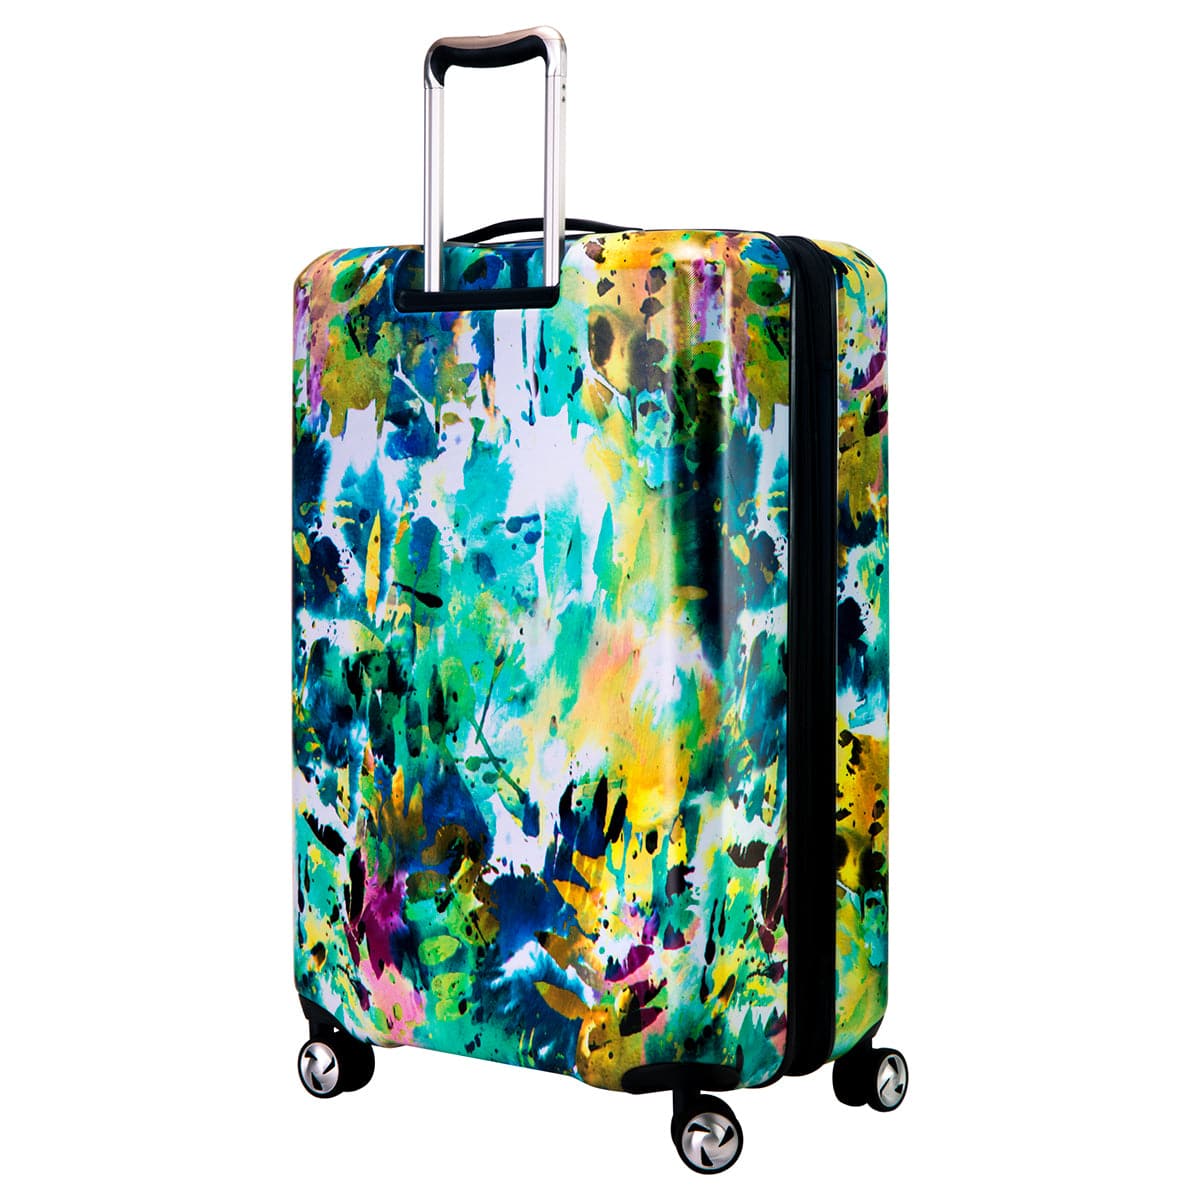 Ricardo Beverly Hills Beaumont Medium Check-In Luggage